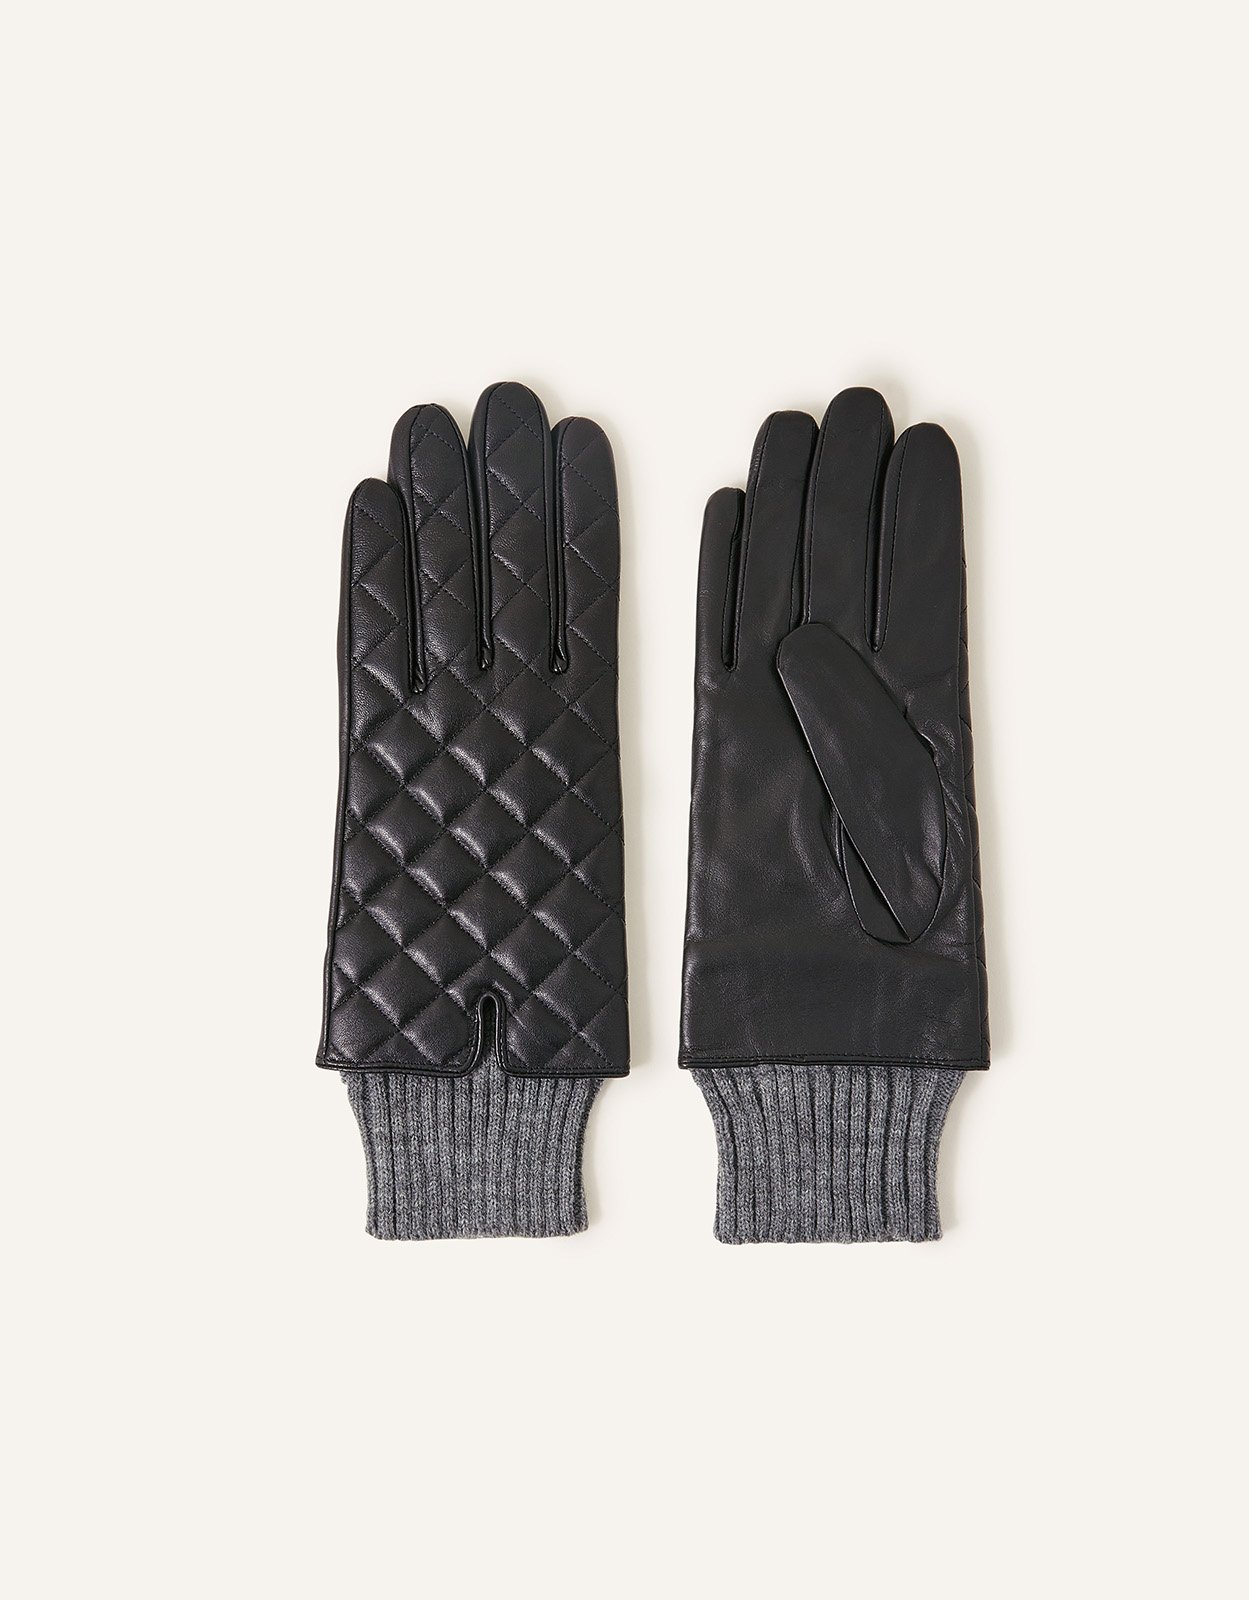 Accessorize Women's Quilted Leather Gloves Black, Size: One Size